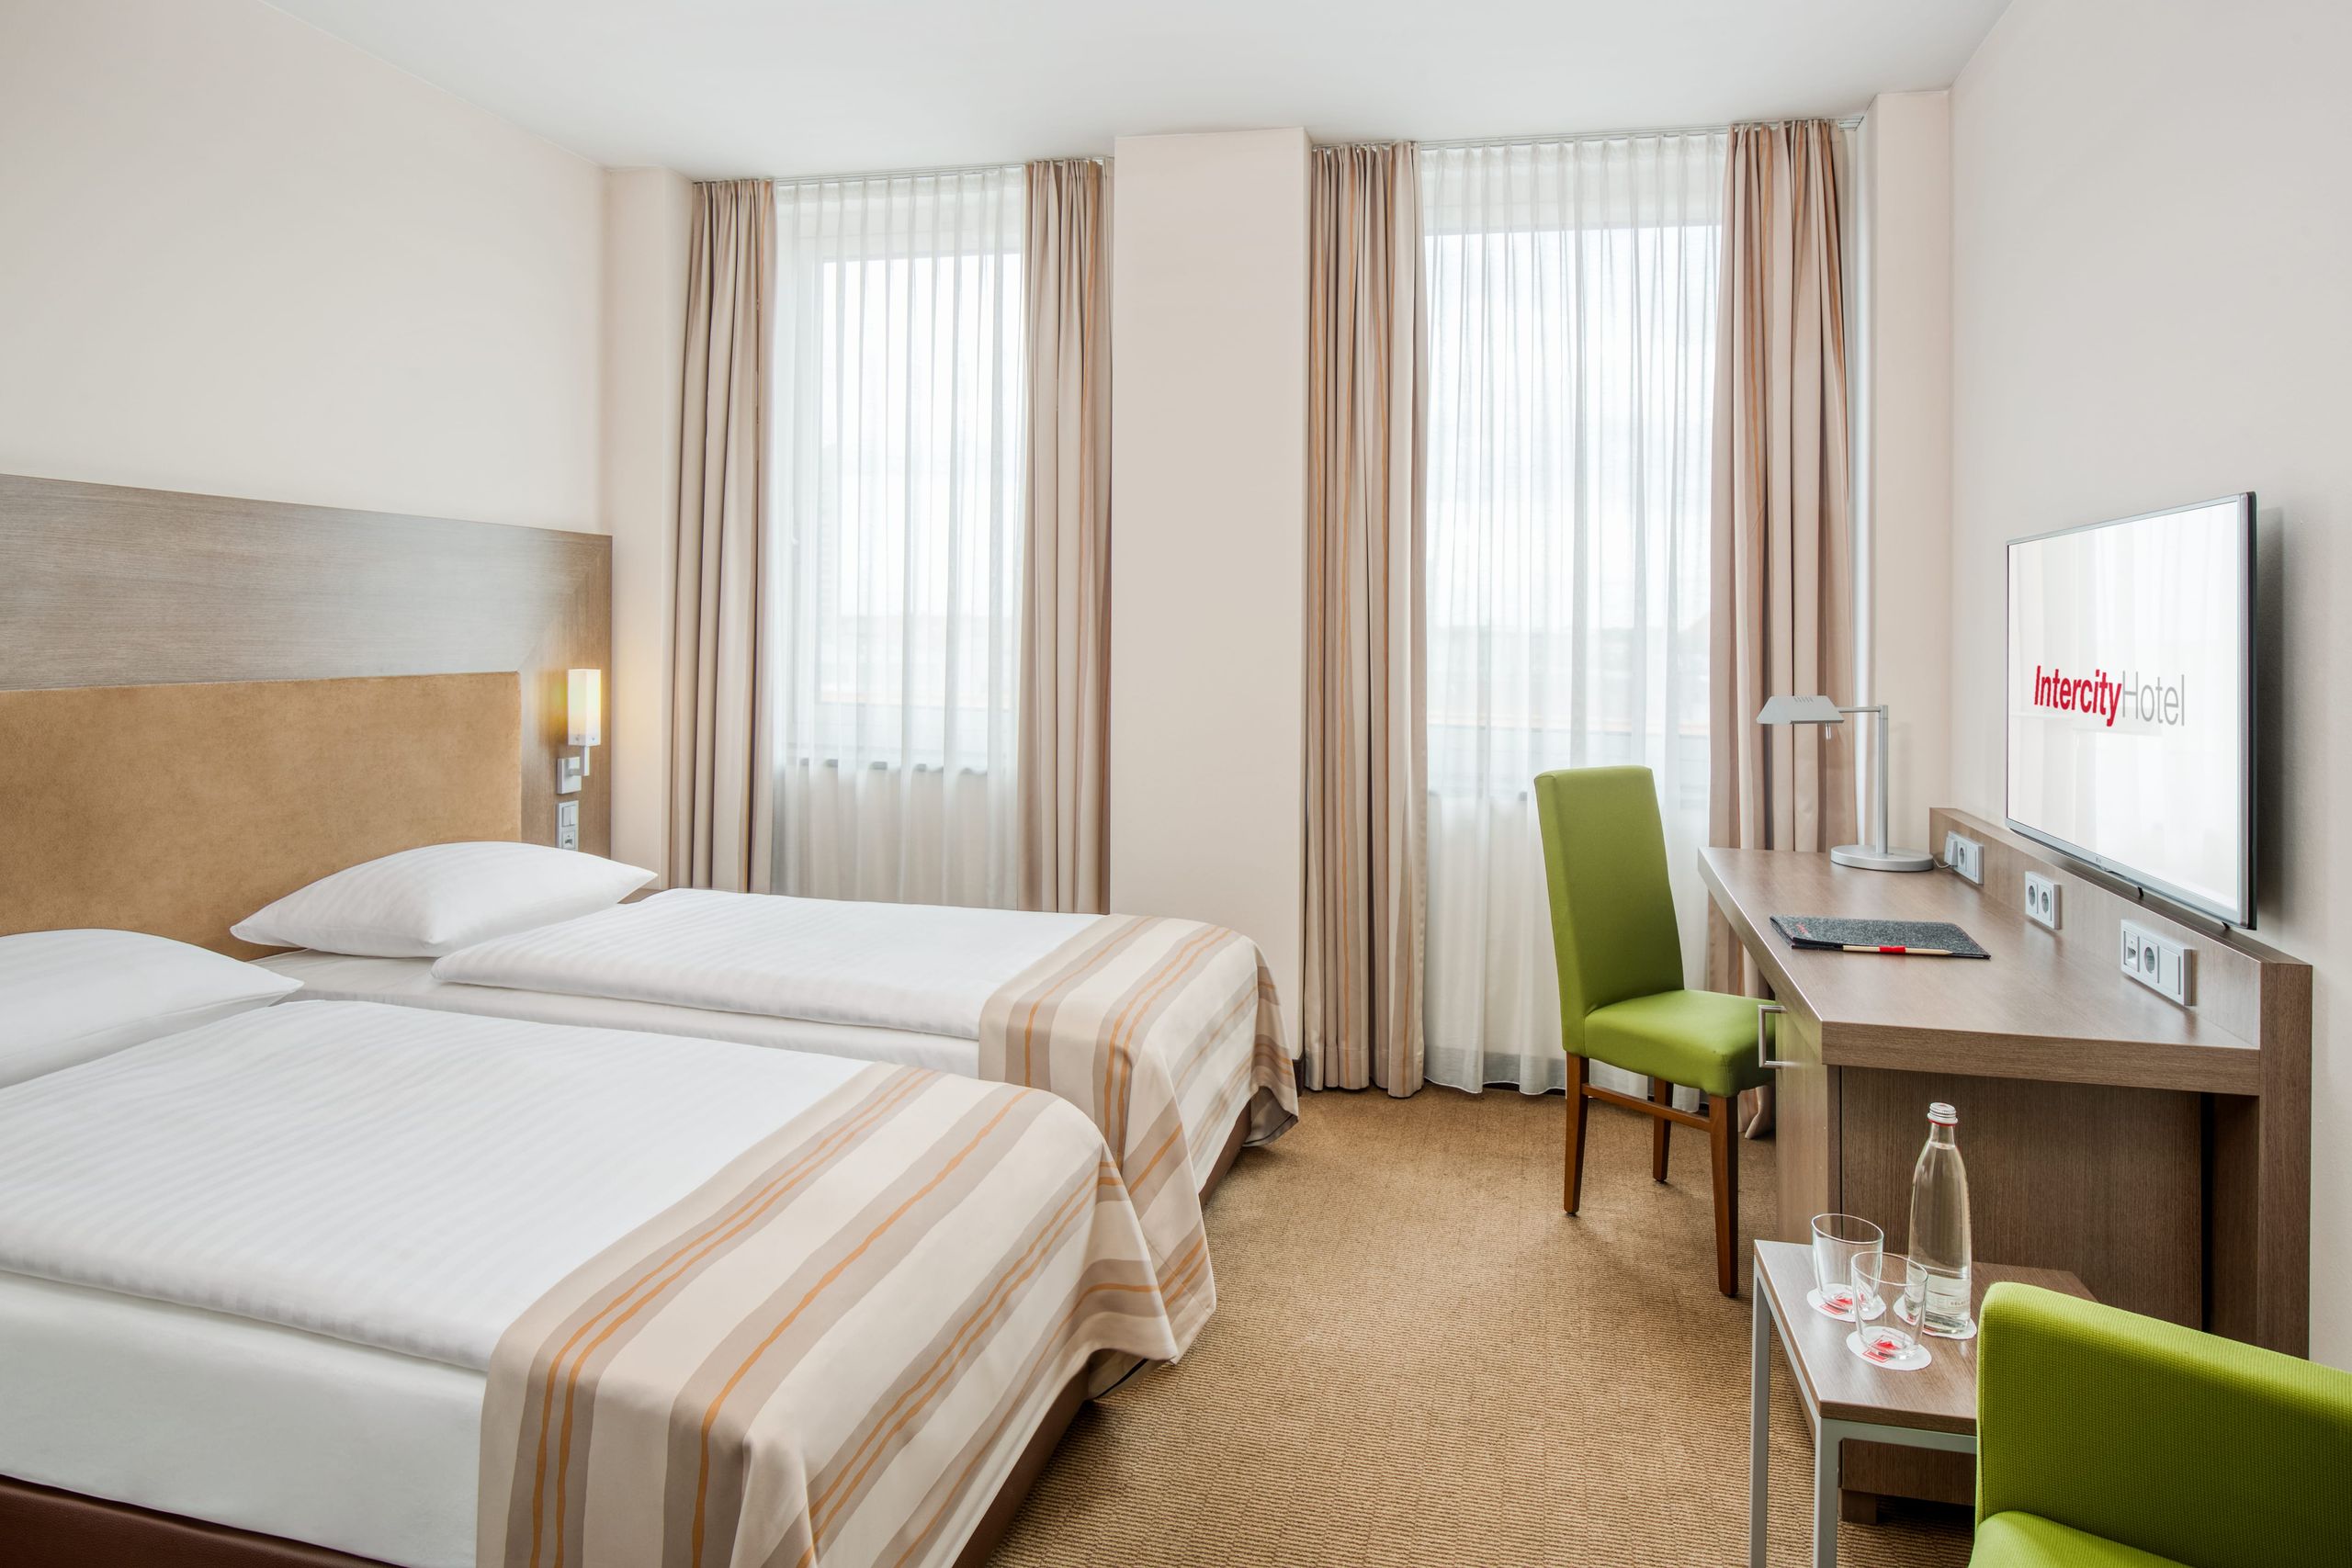 IntercityHotel Hannover - Business Zimmer with separate beds